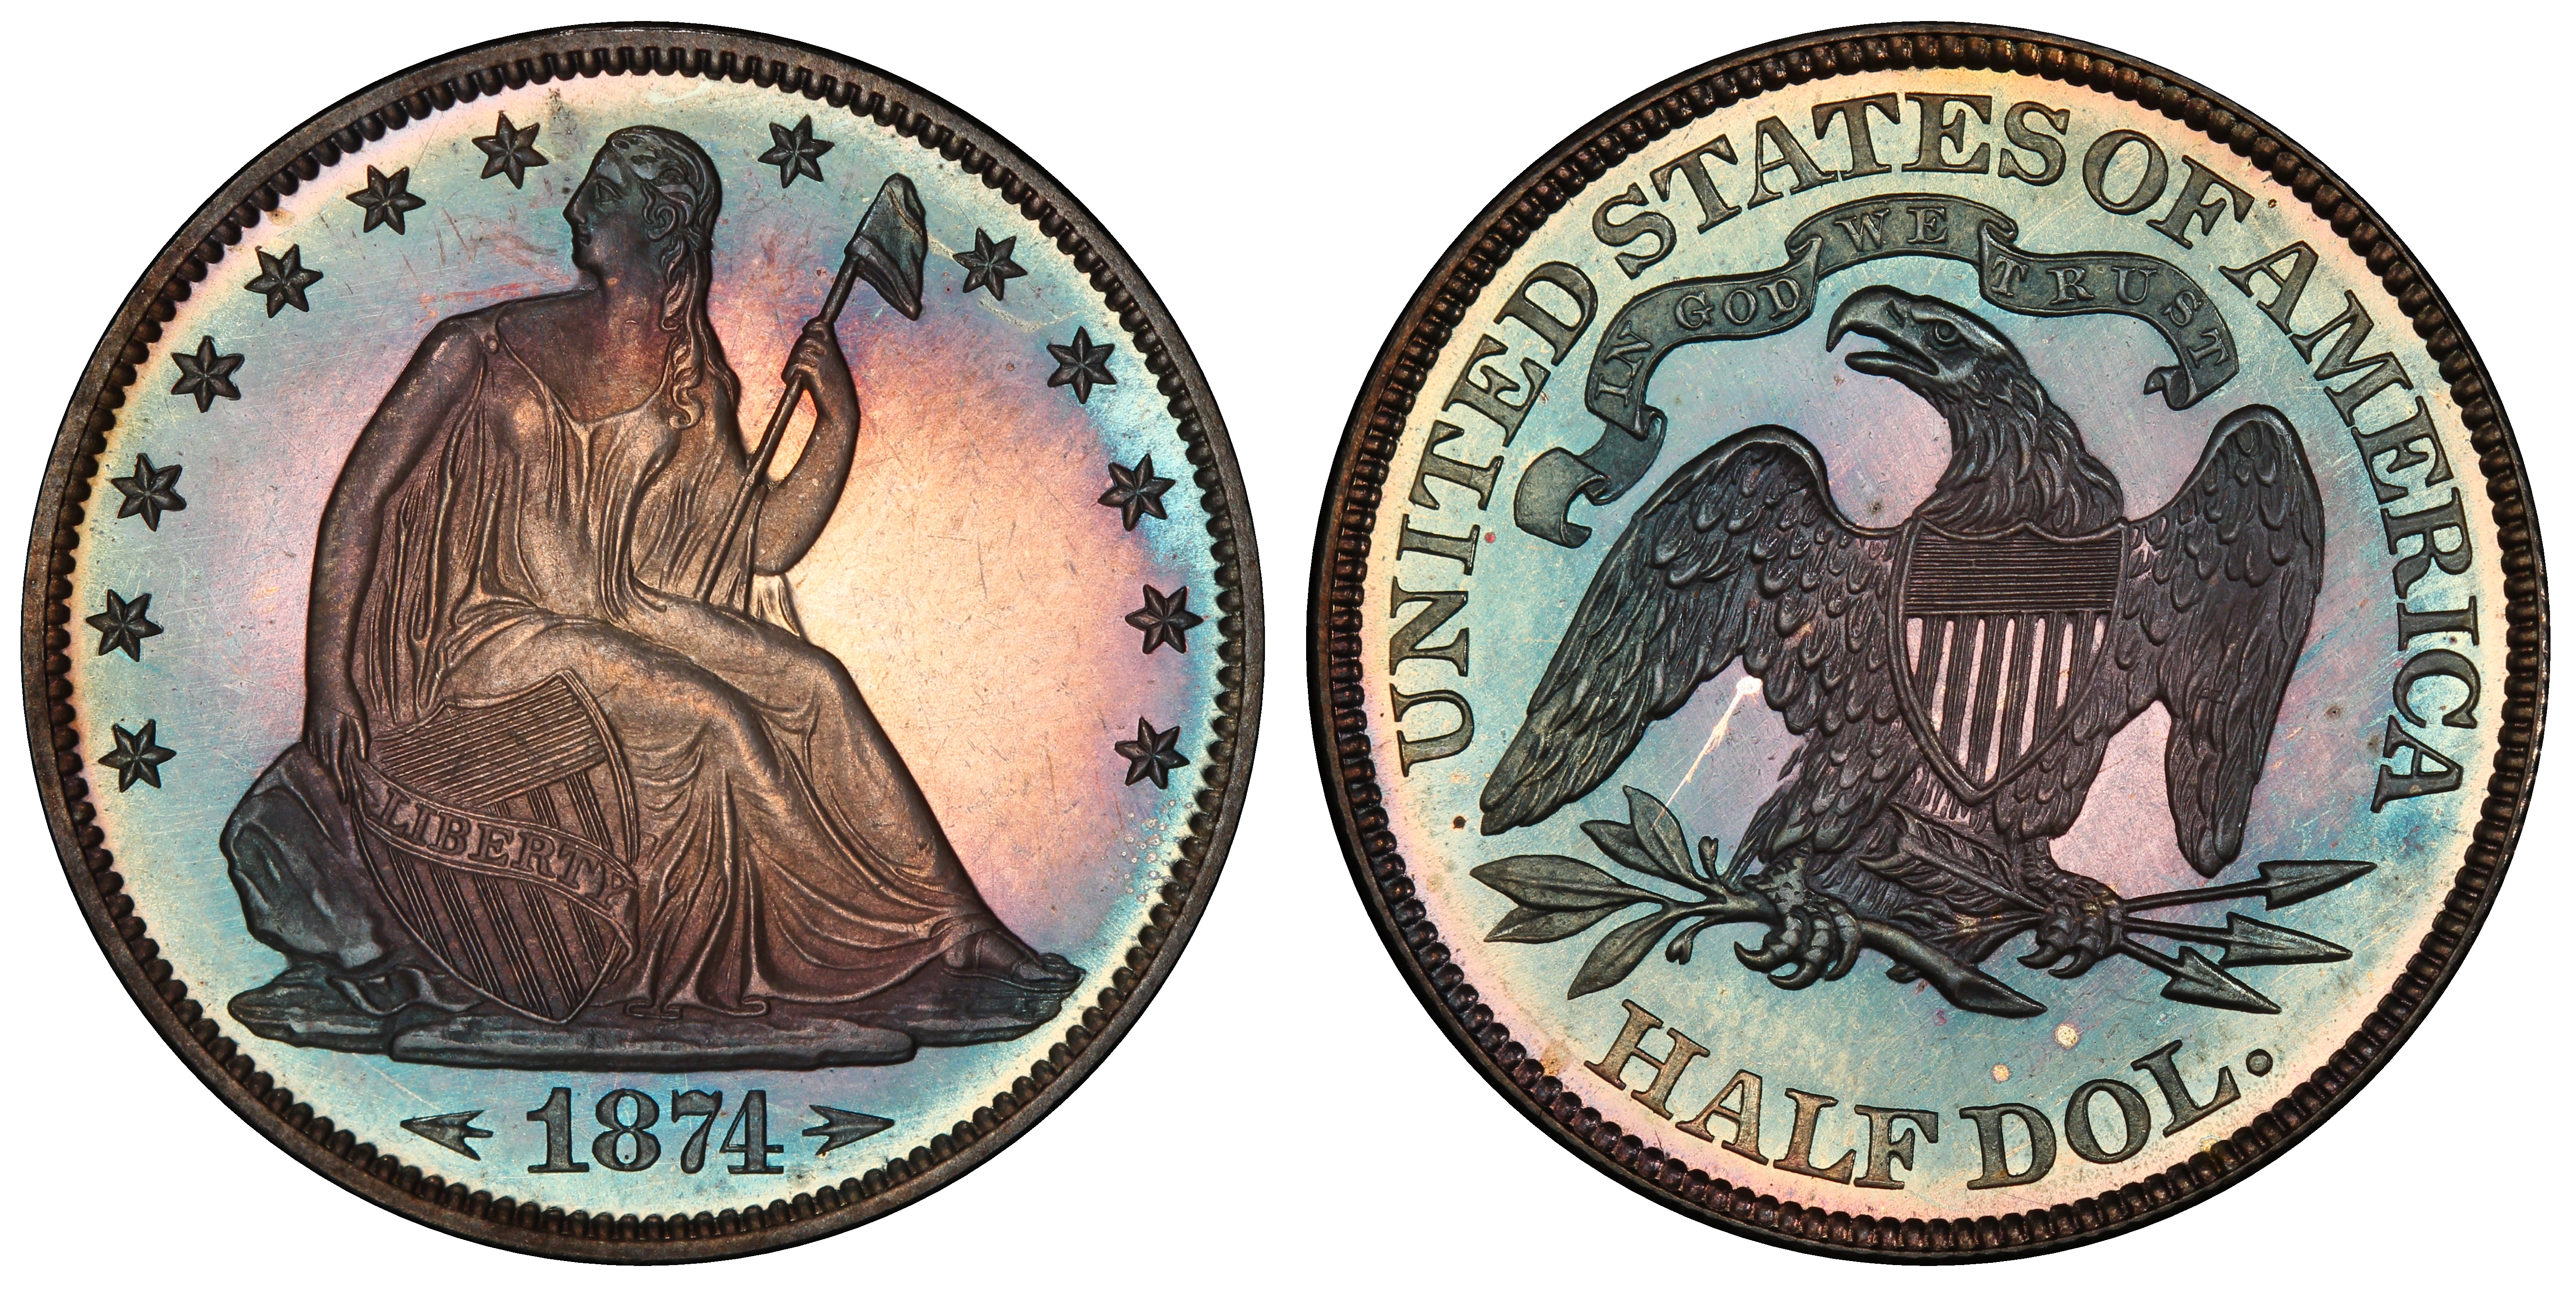 1874 50C Arrows (Proof) Liberty Seated Half Dollar - PCGS CoinFacts